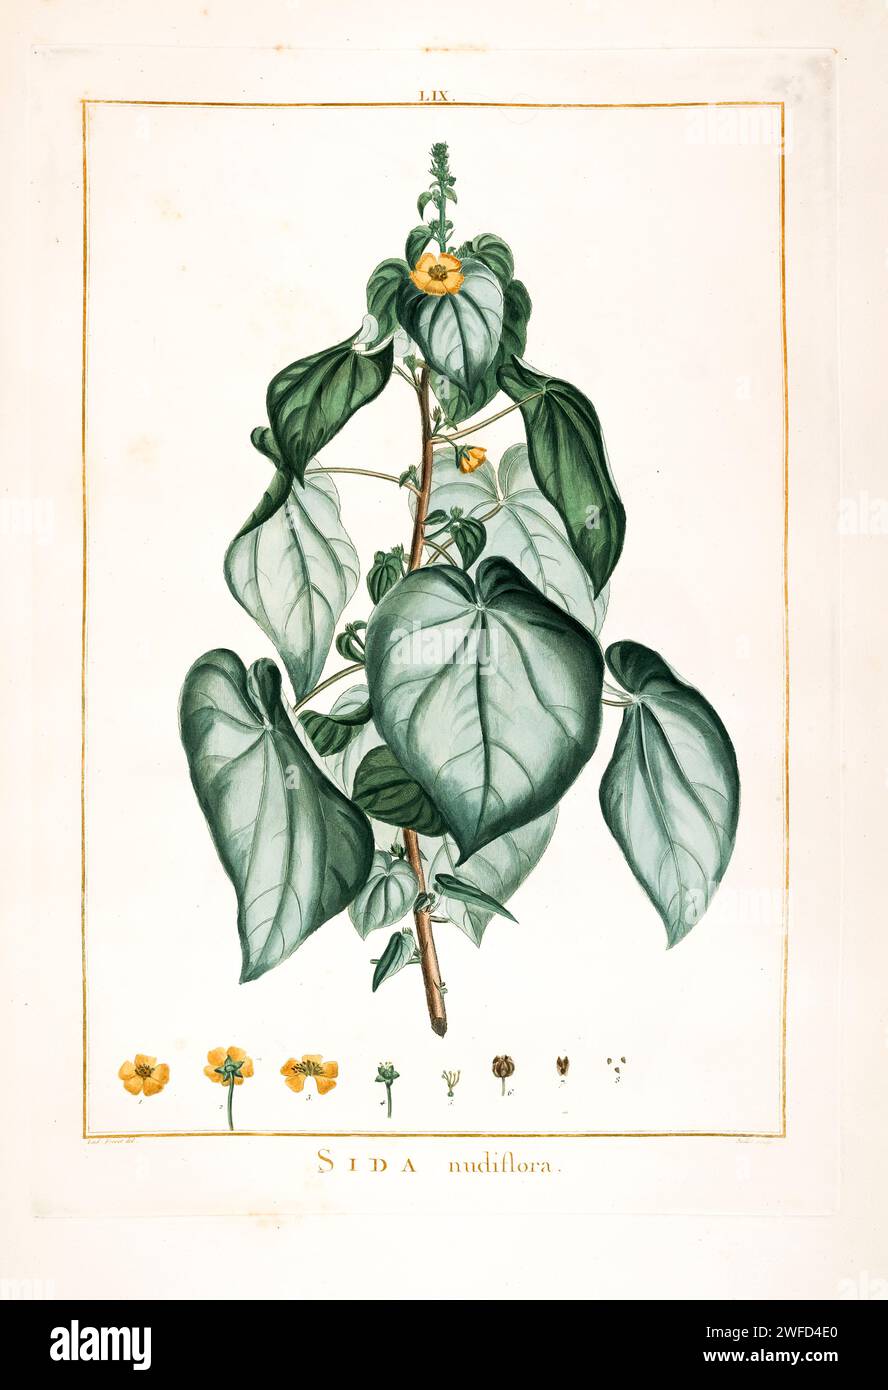 Sida nudiflora syn Wissadula stellata Hand Painted by Pierre-Joseph Redouté and published in Stirpes Novae aut Minus Cognitae (1784) by Charles Louis L'Héritier de Brutelle. Wissadula is a genus of flowering plants in the mallow family, Malvaceae. It contains 25 to 30 species of herbs and subshrubs that are mostly native to the Neotropics, with several in tropical Asia and Africa. Stock Photo